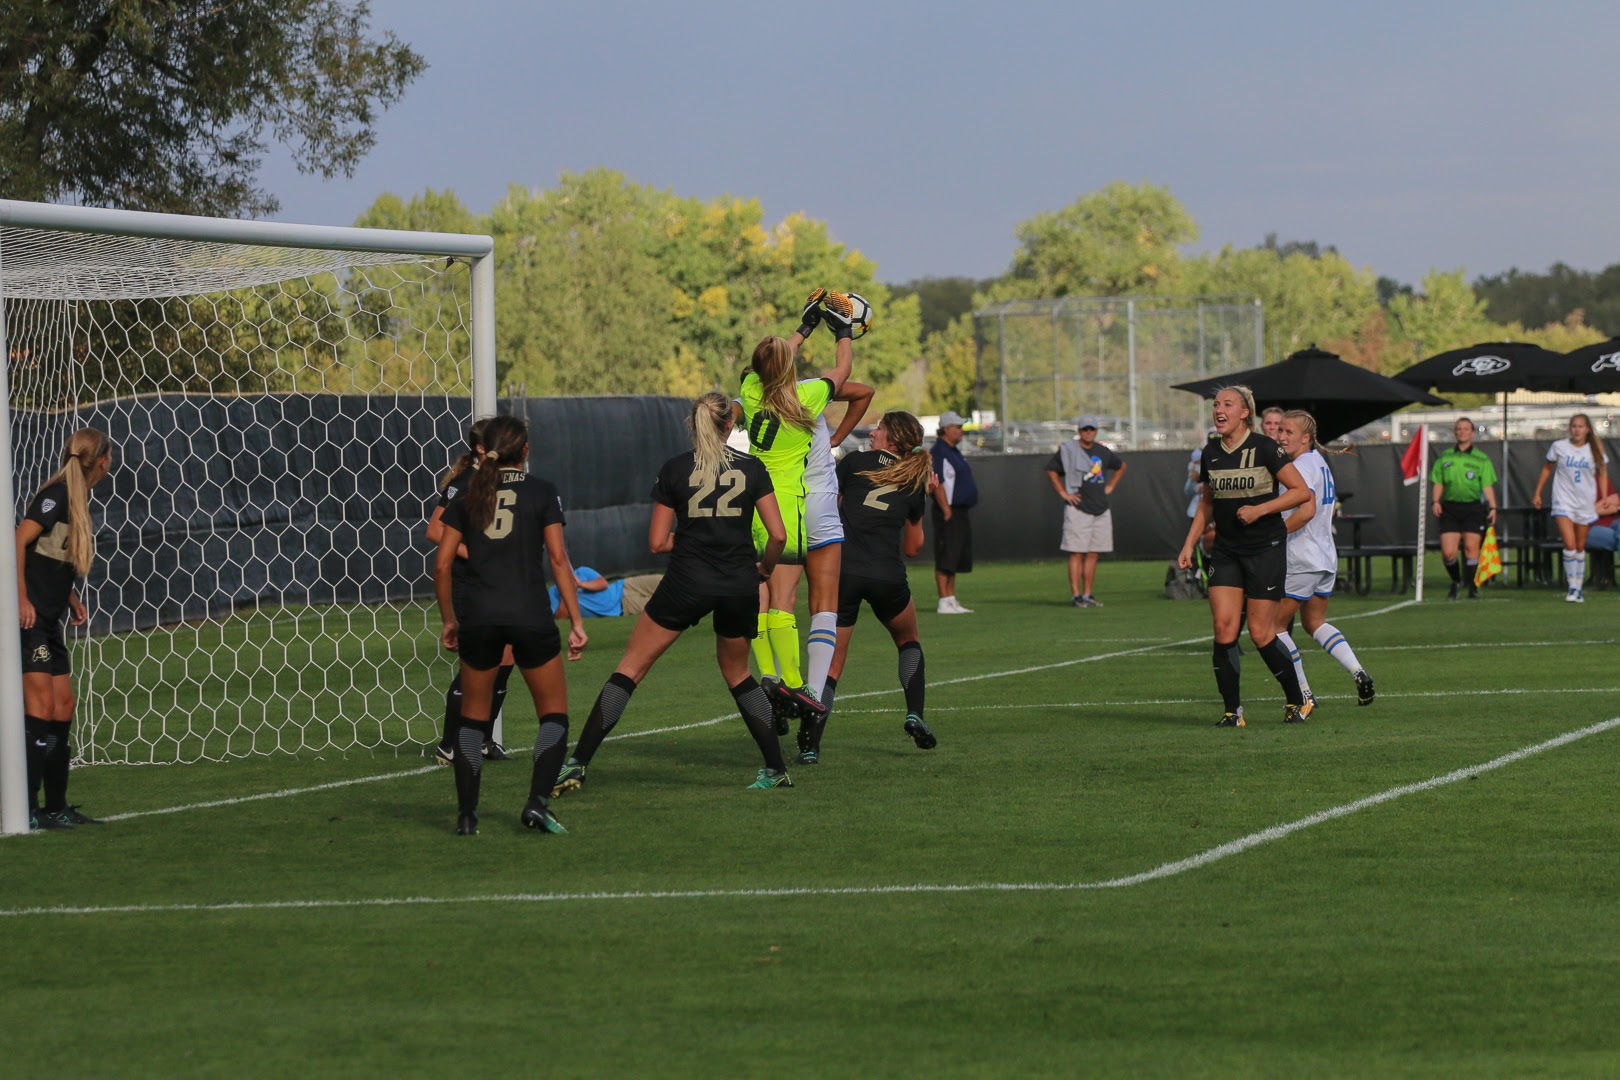 Colorado outdueled at home by No. 1 UCLA, as Buffs fall 2-0